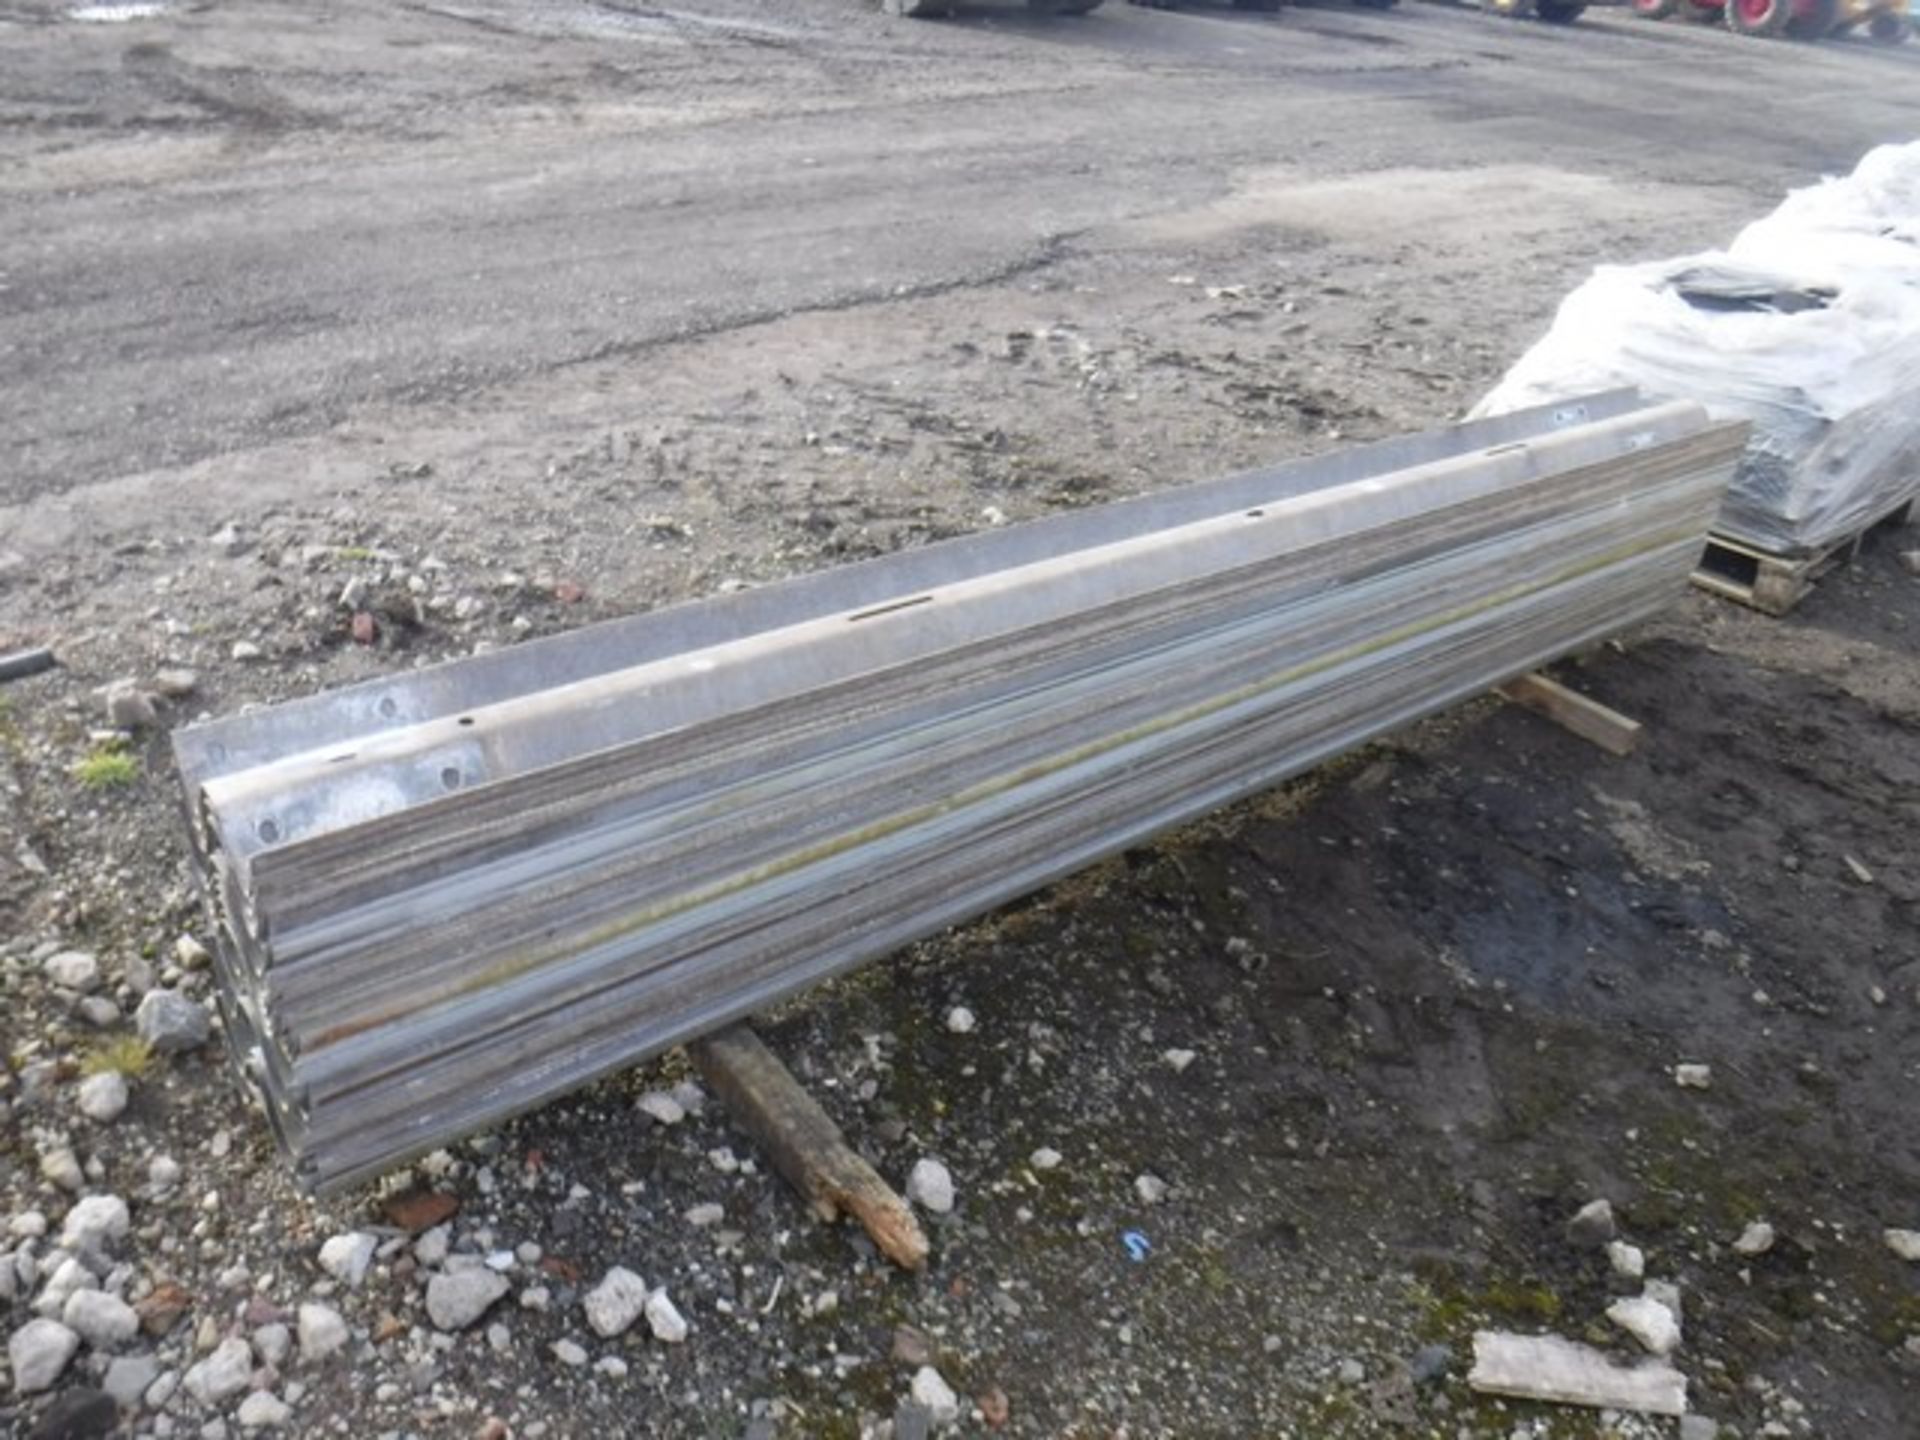 Crash barriers used x 39 - Image 2 of 2